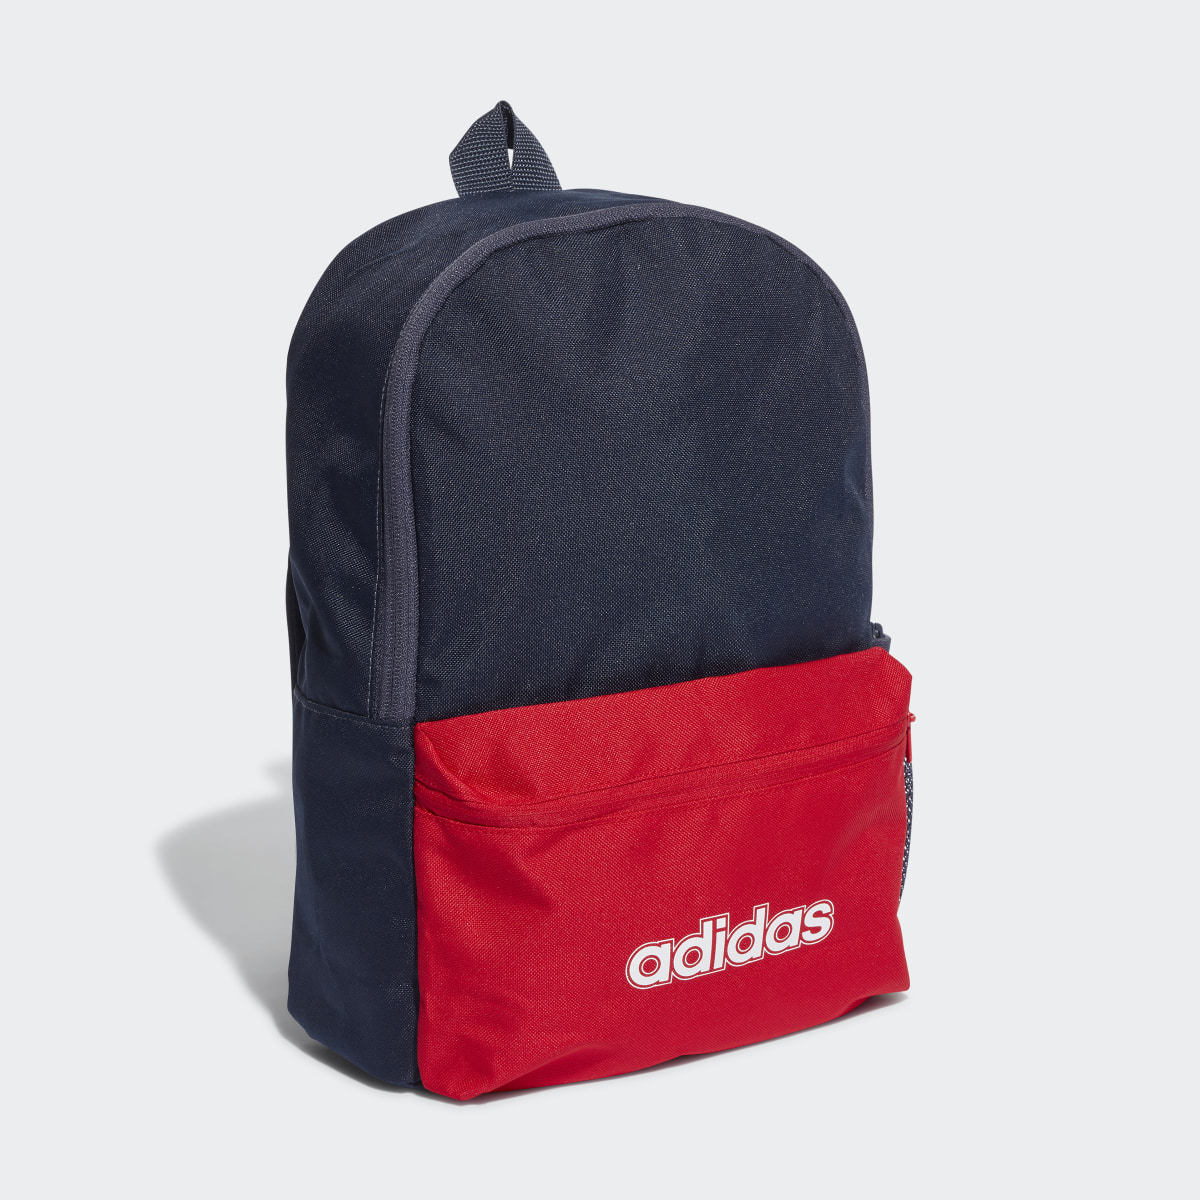 Adidas Graphic Backpack. 4